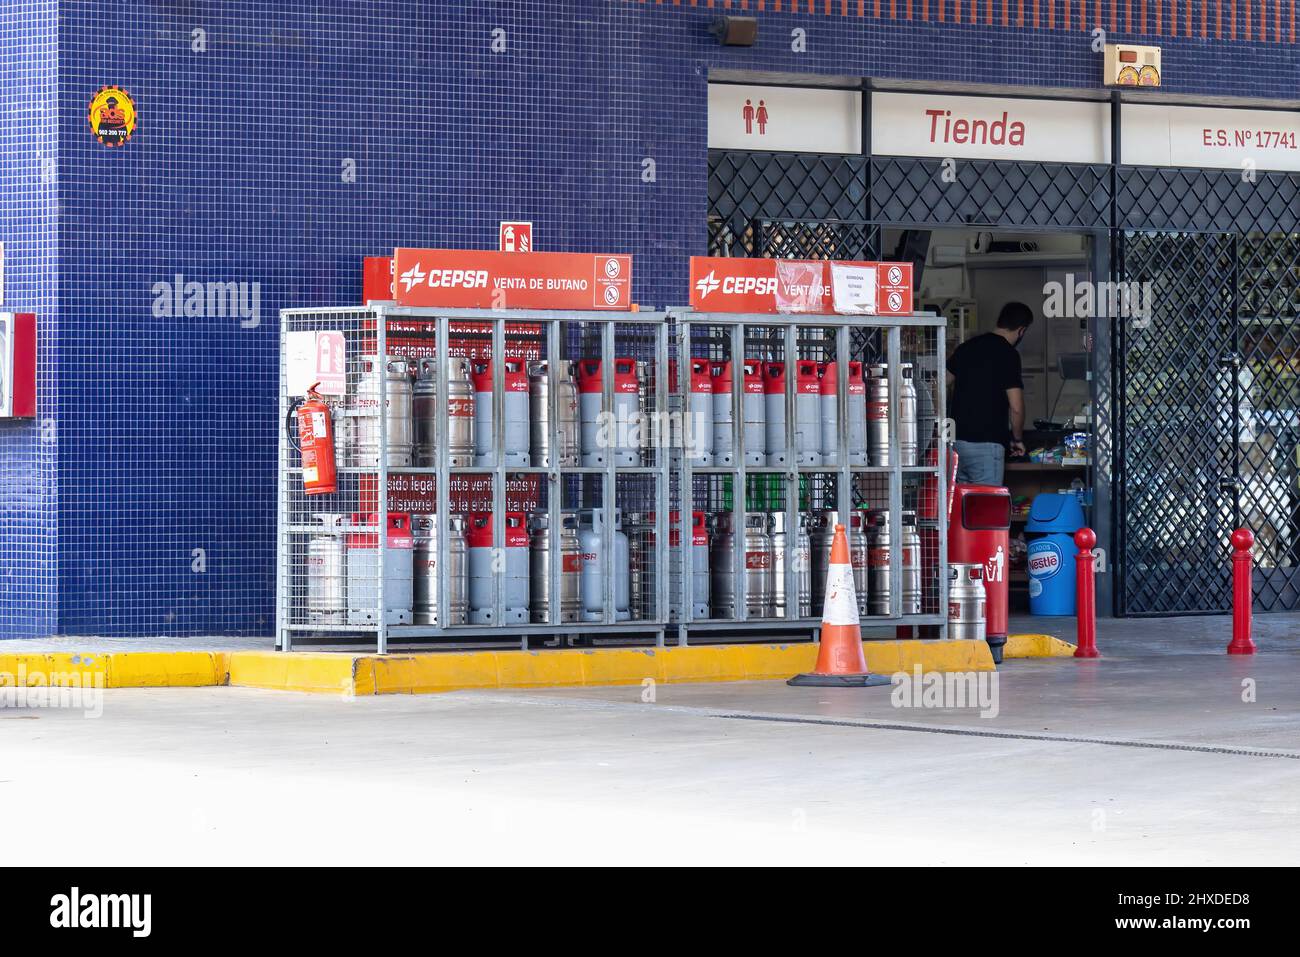 Huelva, Spain - March 10, 2022: Cepsa gas cylinders of butane and propane for sale at a Service station Stock Photo